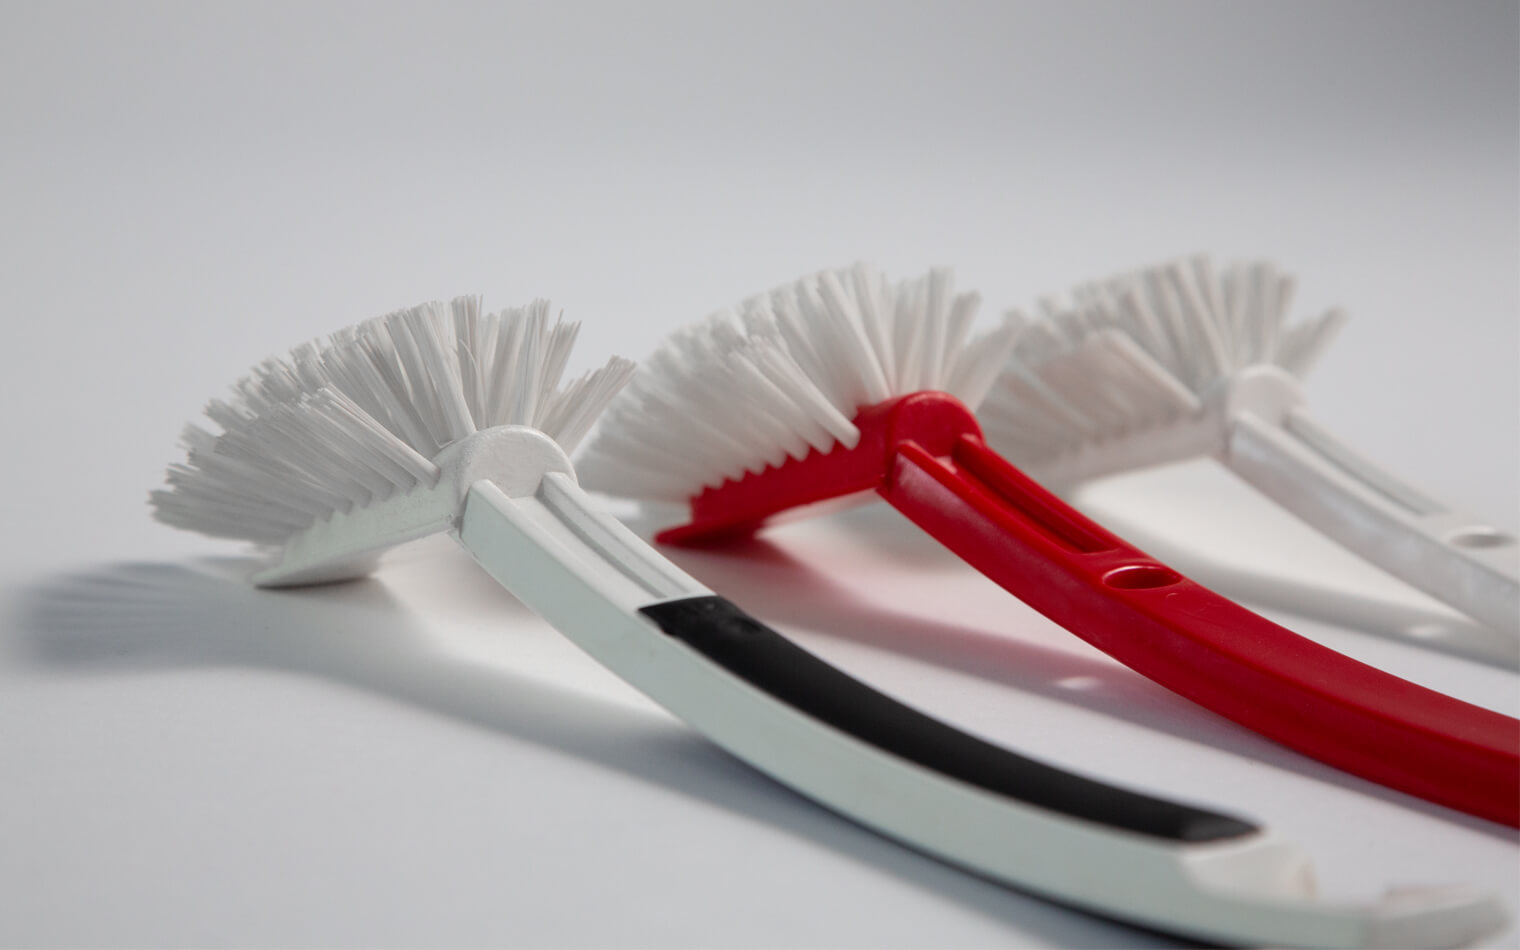 In this picture you can see the underside of the handle of the dishwashing brush.